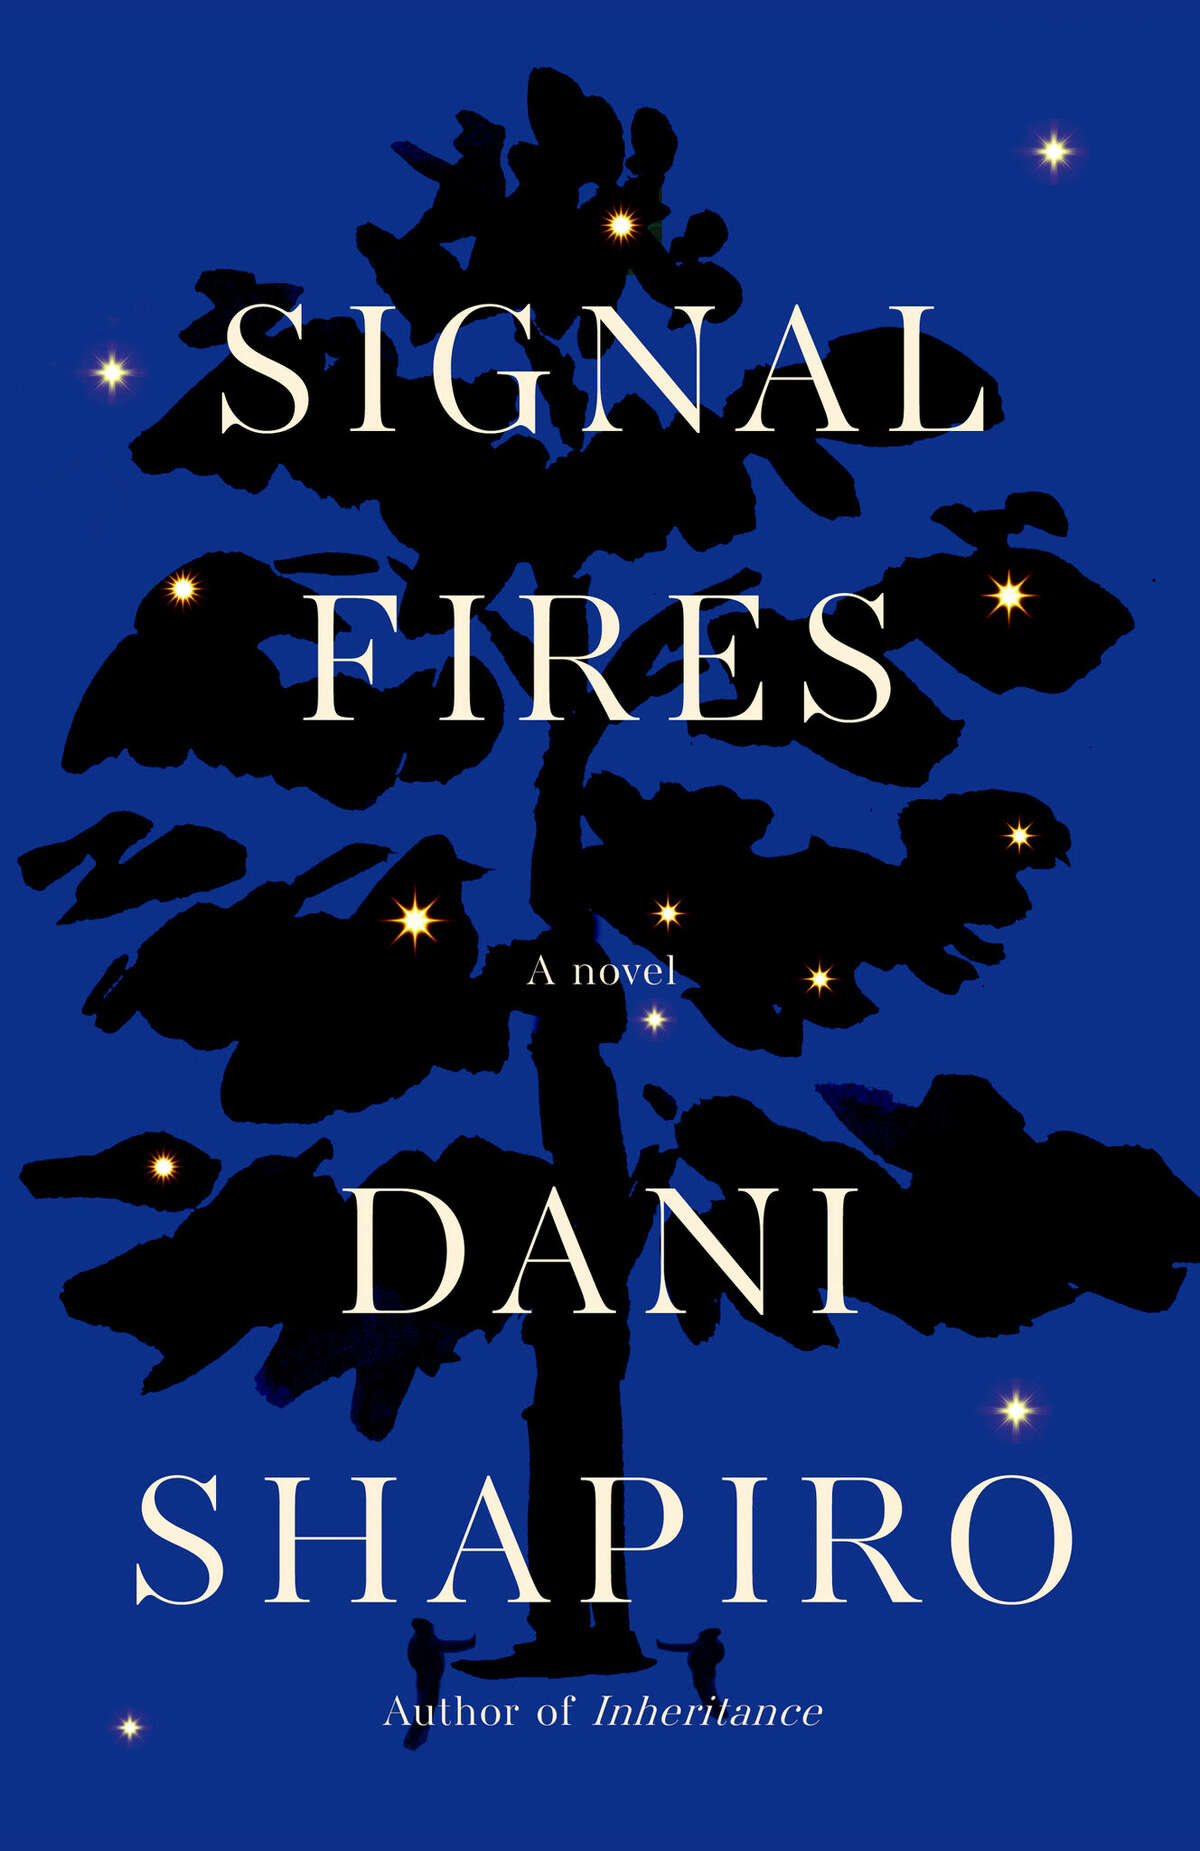 Washington's Community Table restaurant will welcome author Dani Shaprio for a reading and talk at 2 p.m. Oct. 16. 